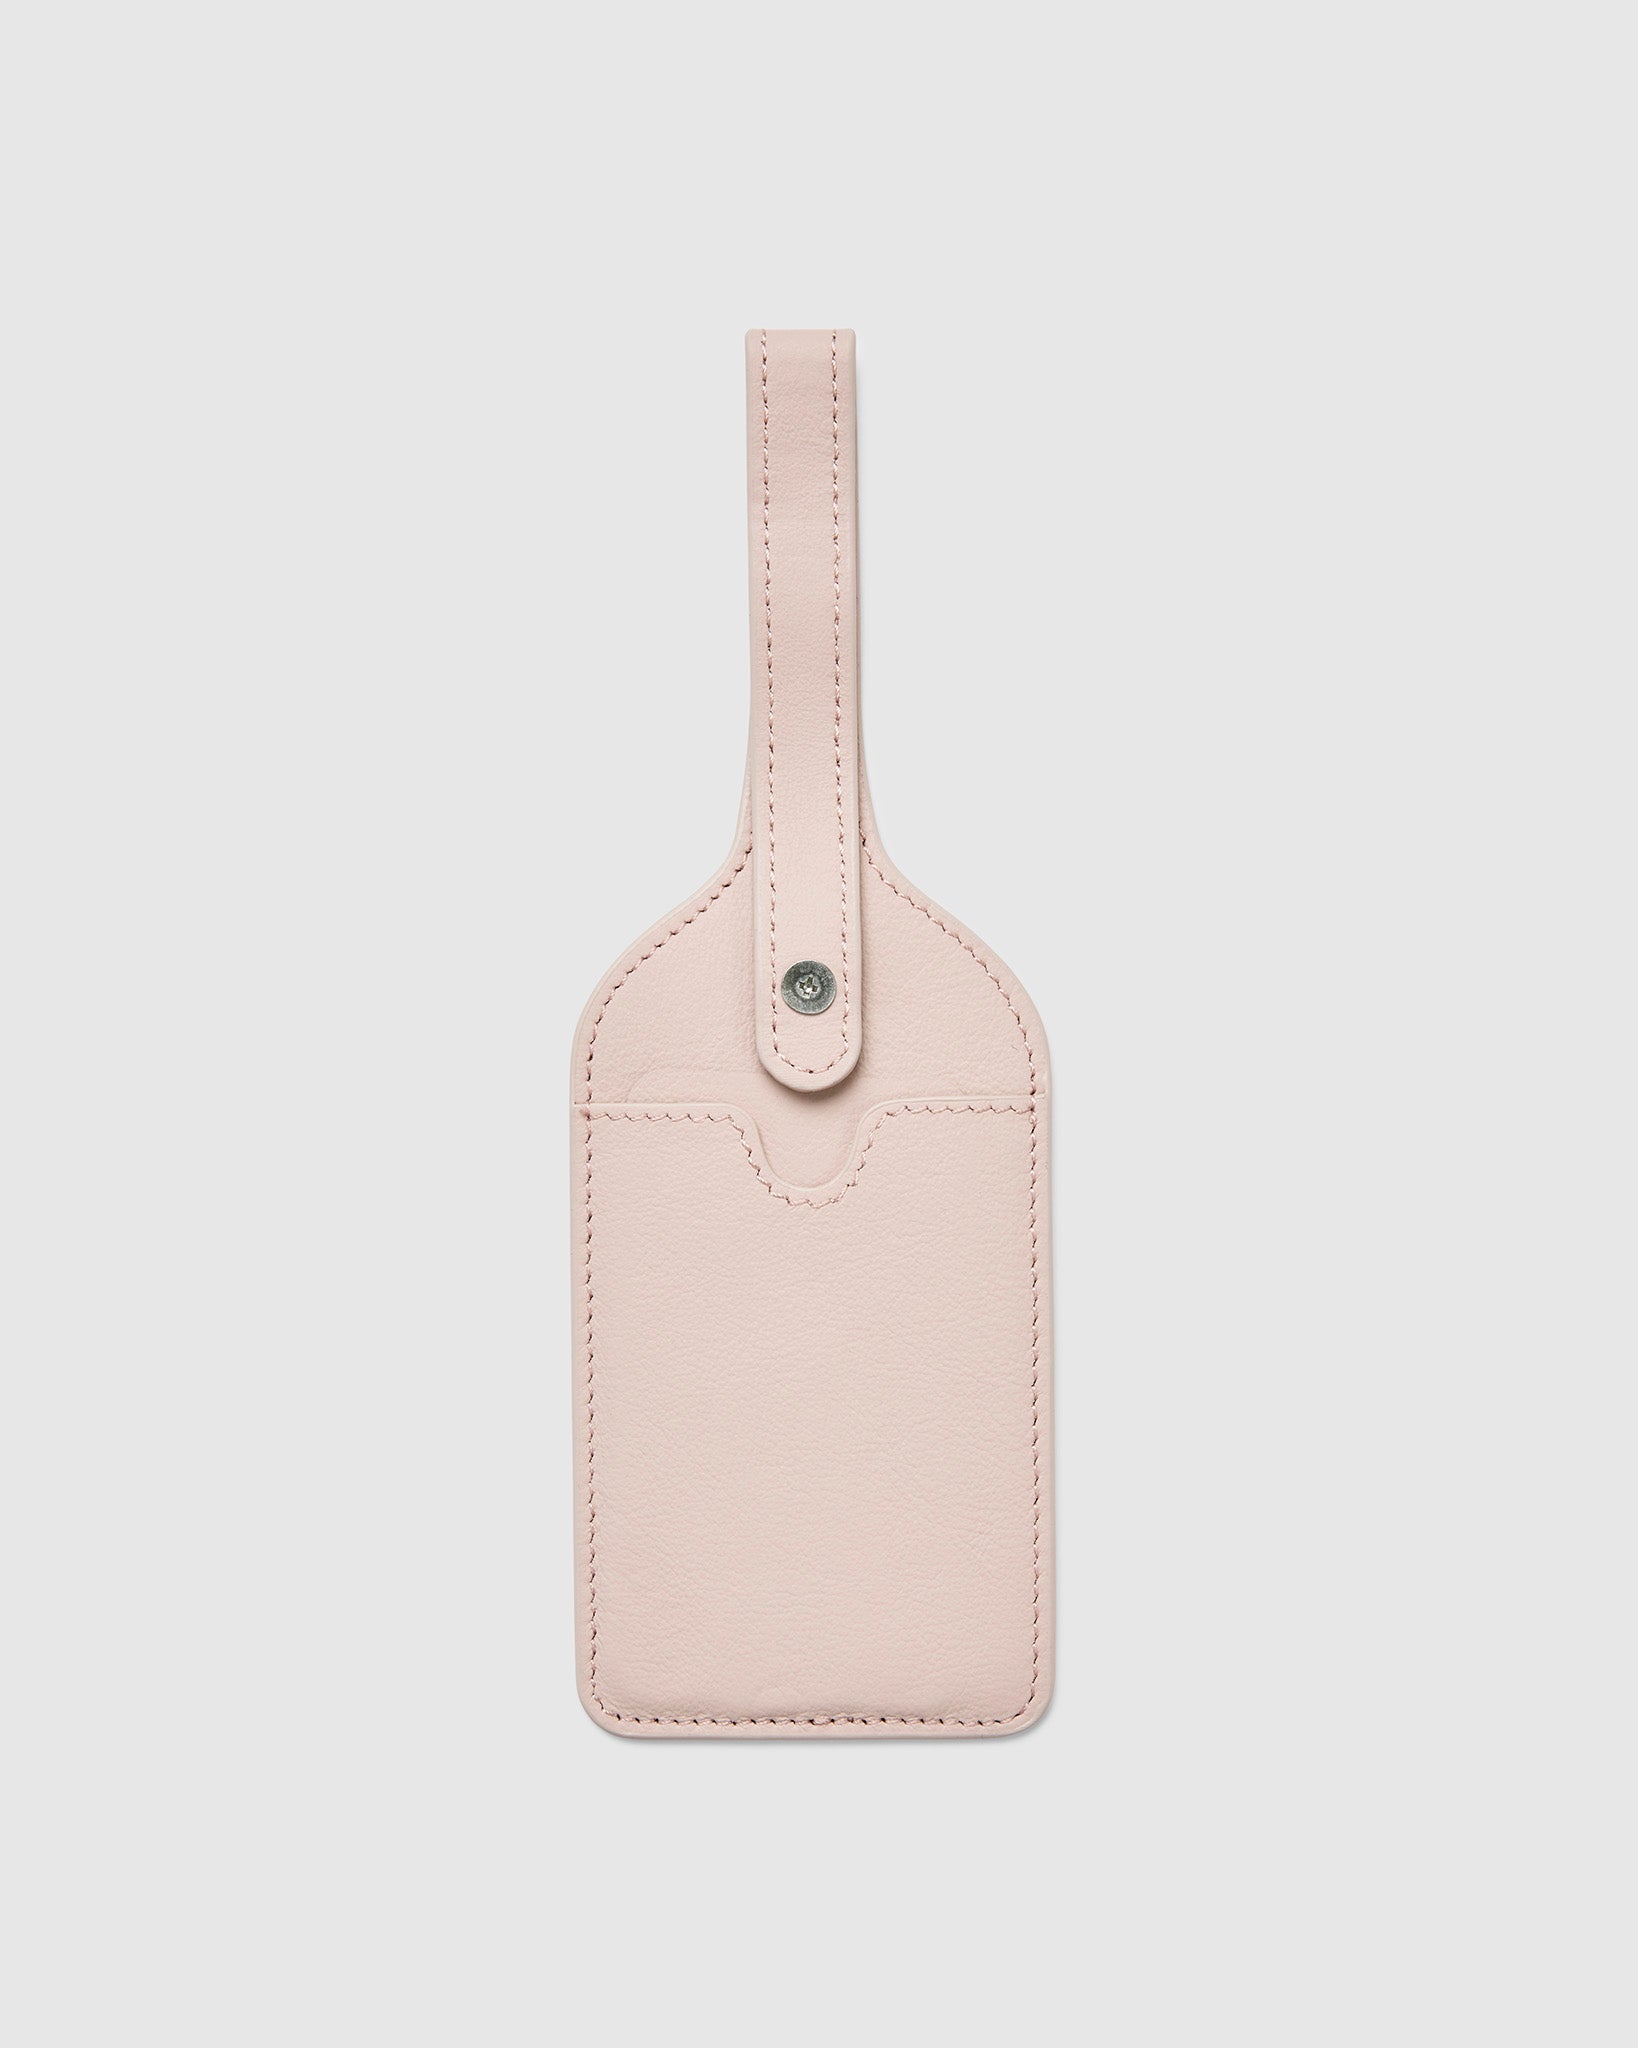 Leather Luggage Tag in Chic Rose